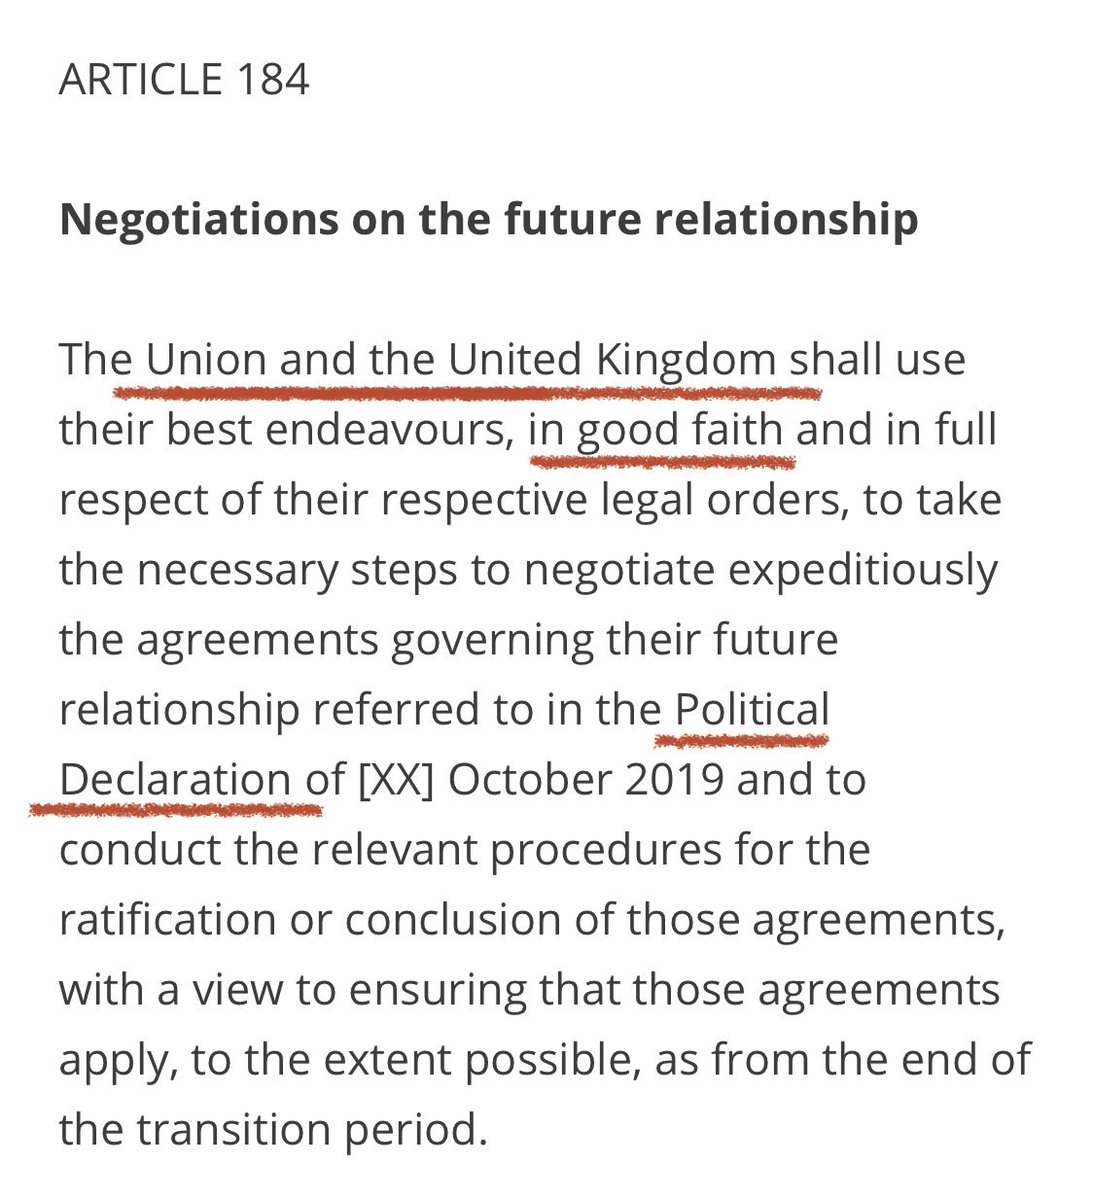 The UK’s redlines were known to the EU, they knew that we would not budge on fishing or given them control of our laws and 100% not agree to be regulated by the ECJ so why are they asking for it now? Desperation. They are desperate. Acting in bad faith becaue of it.